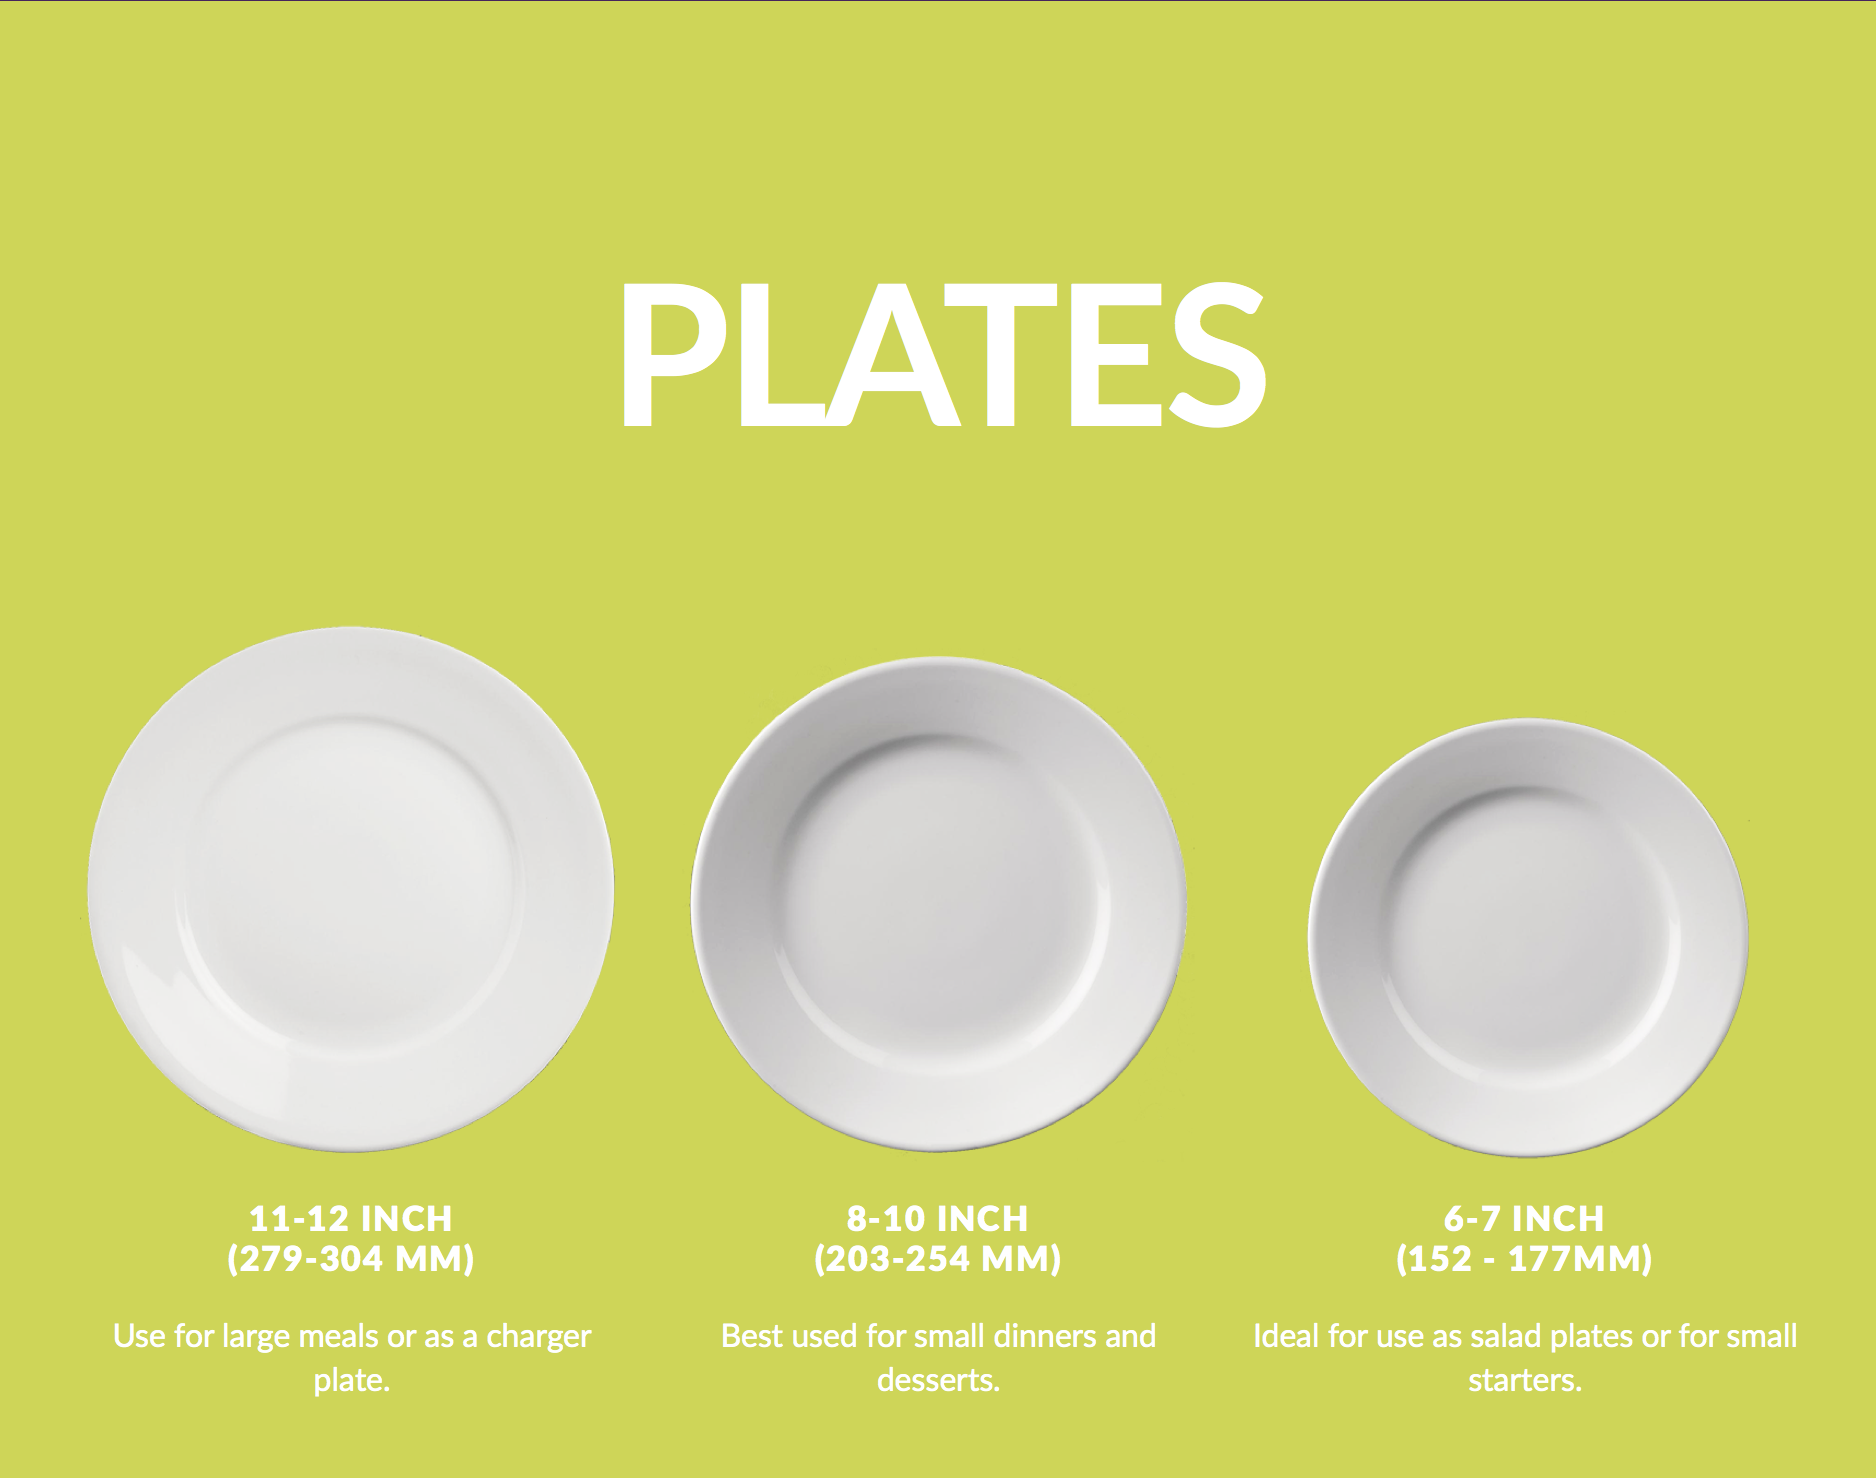 Plates Size Guide